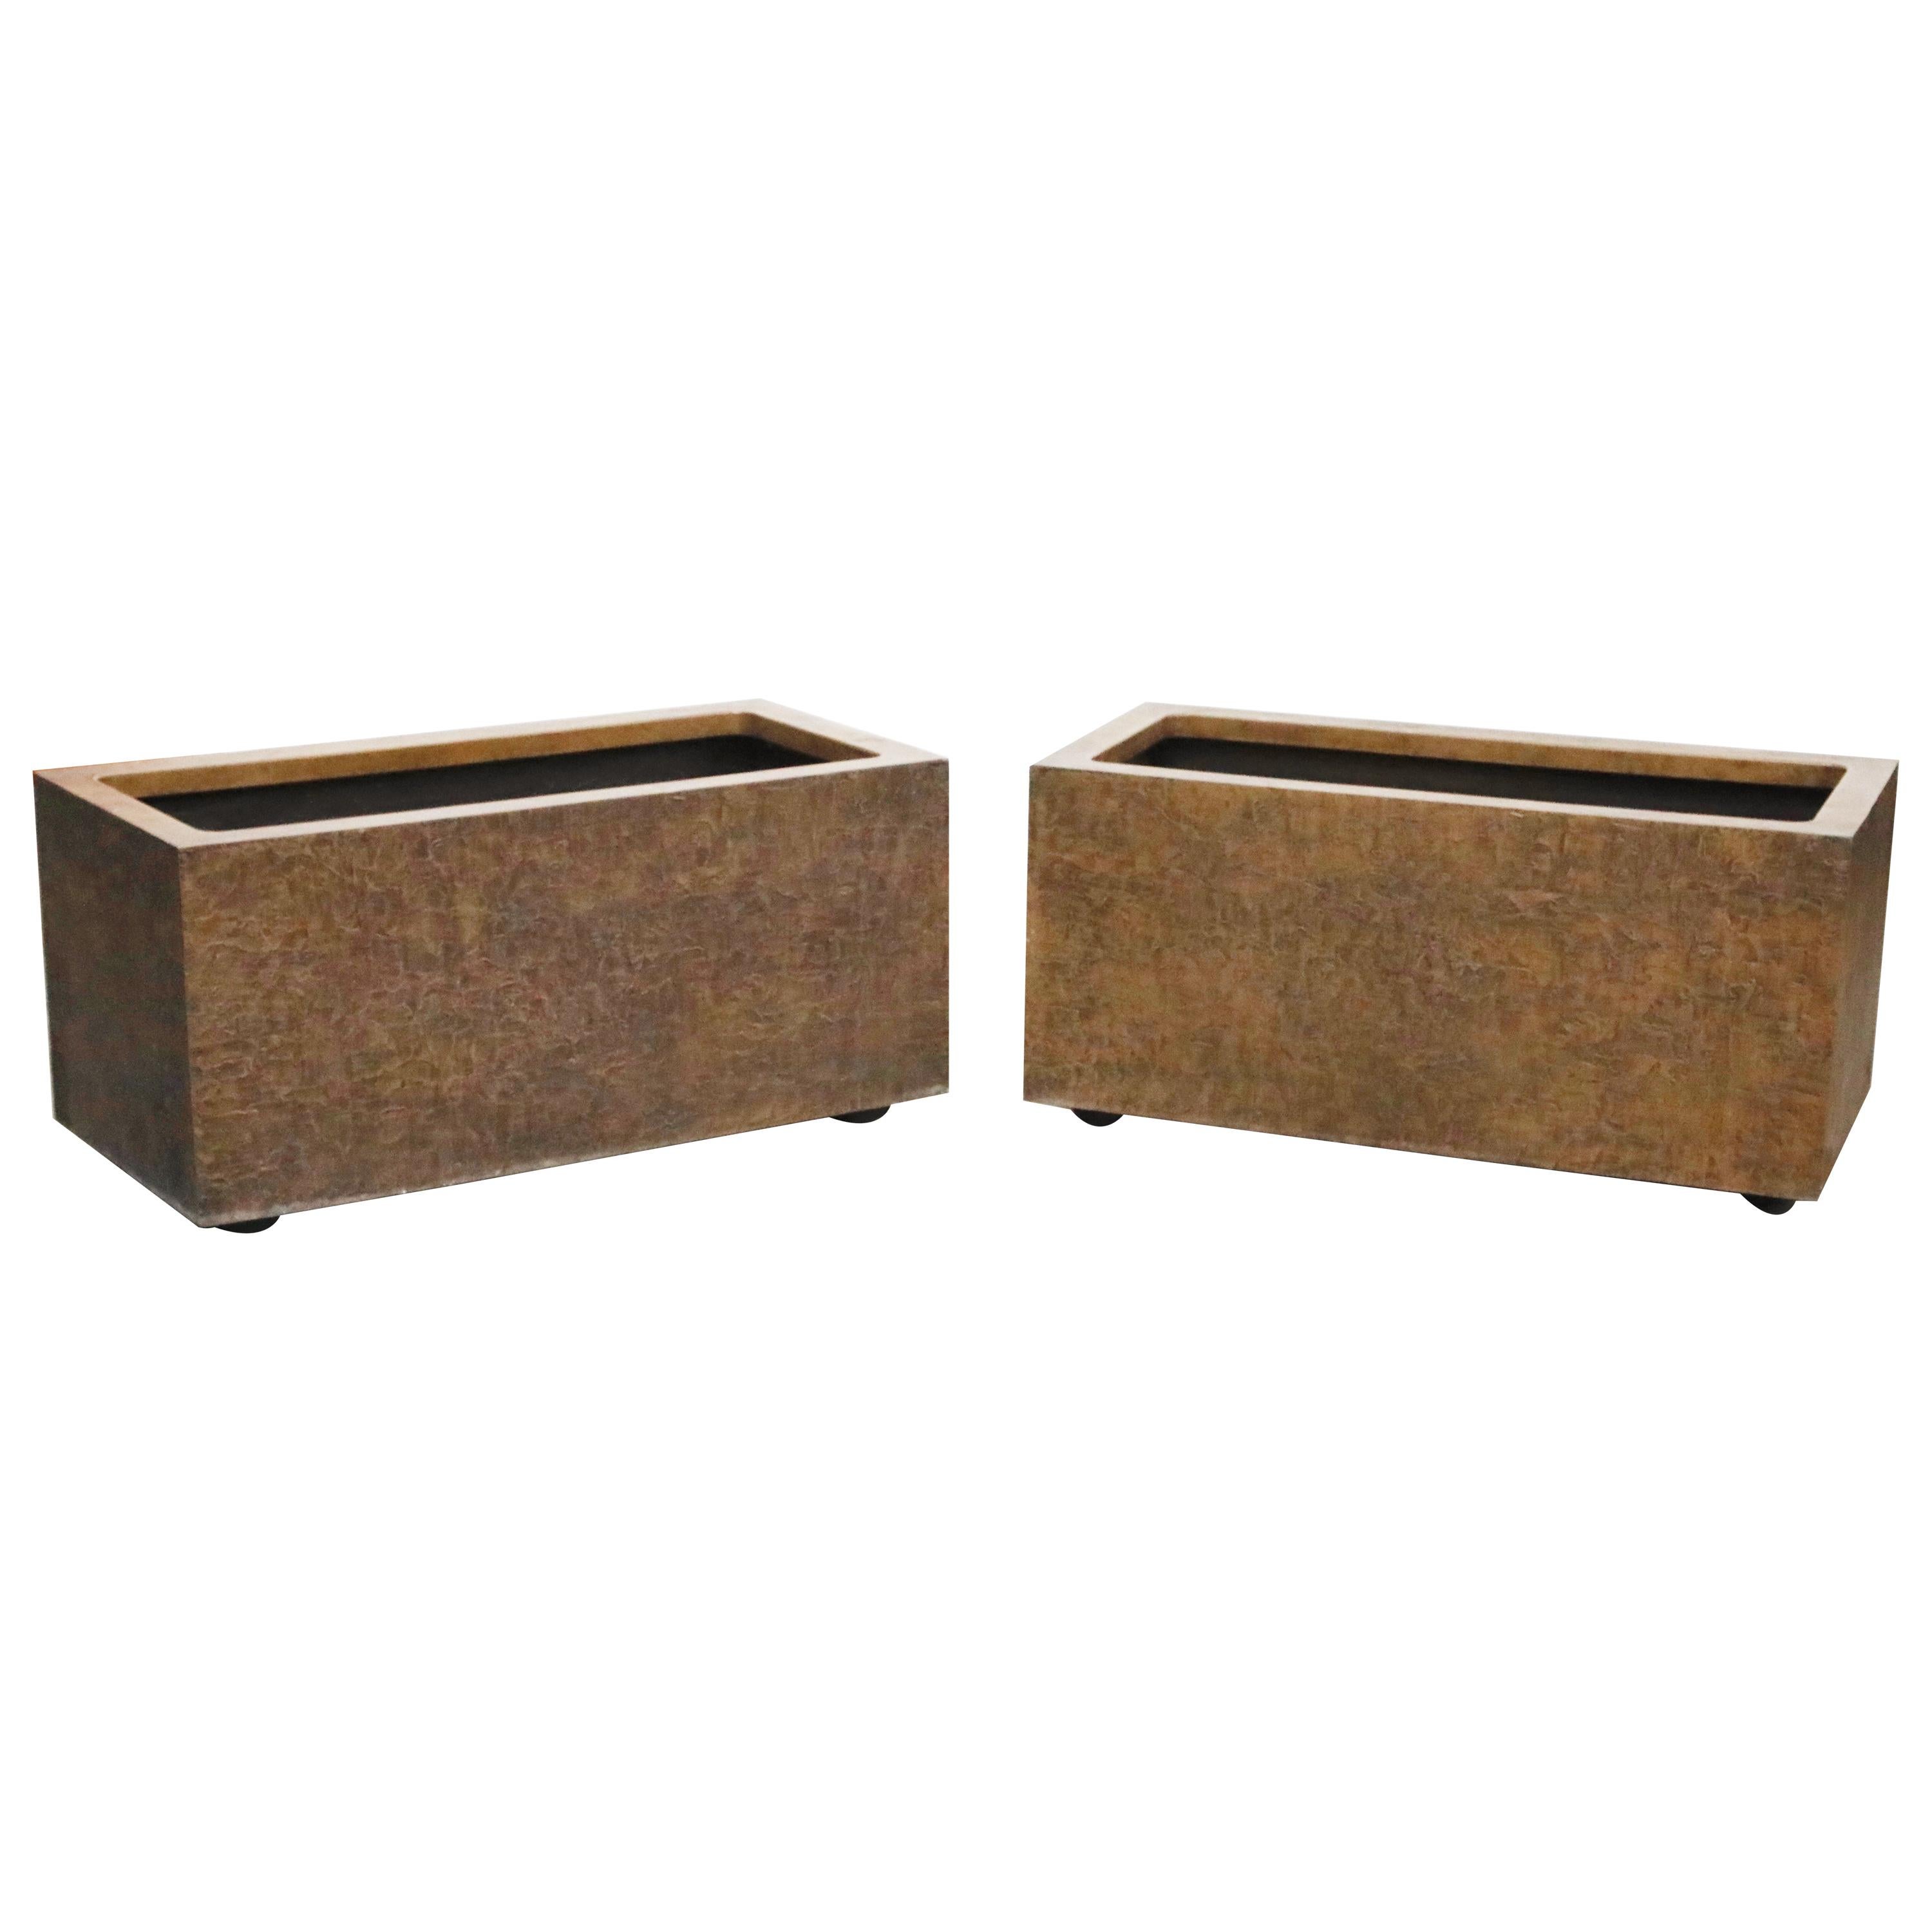 Large Rectangular Architectural Fiberglass Planters by Forms and Surfaces